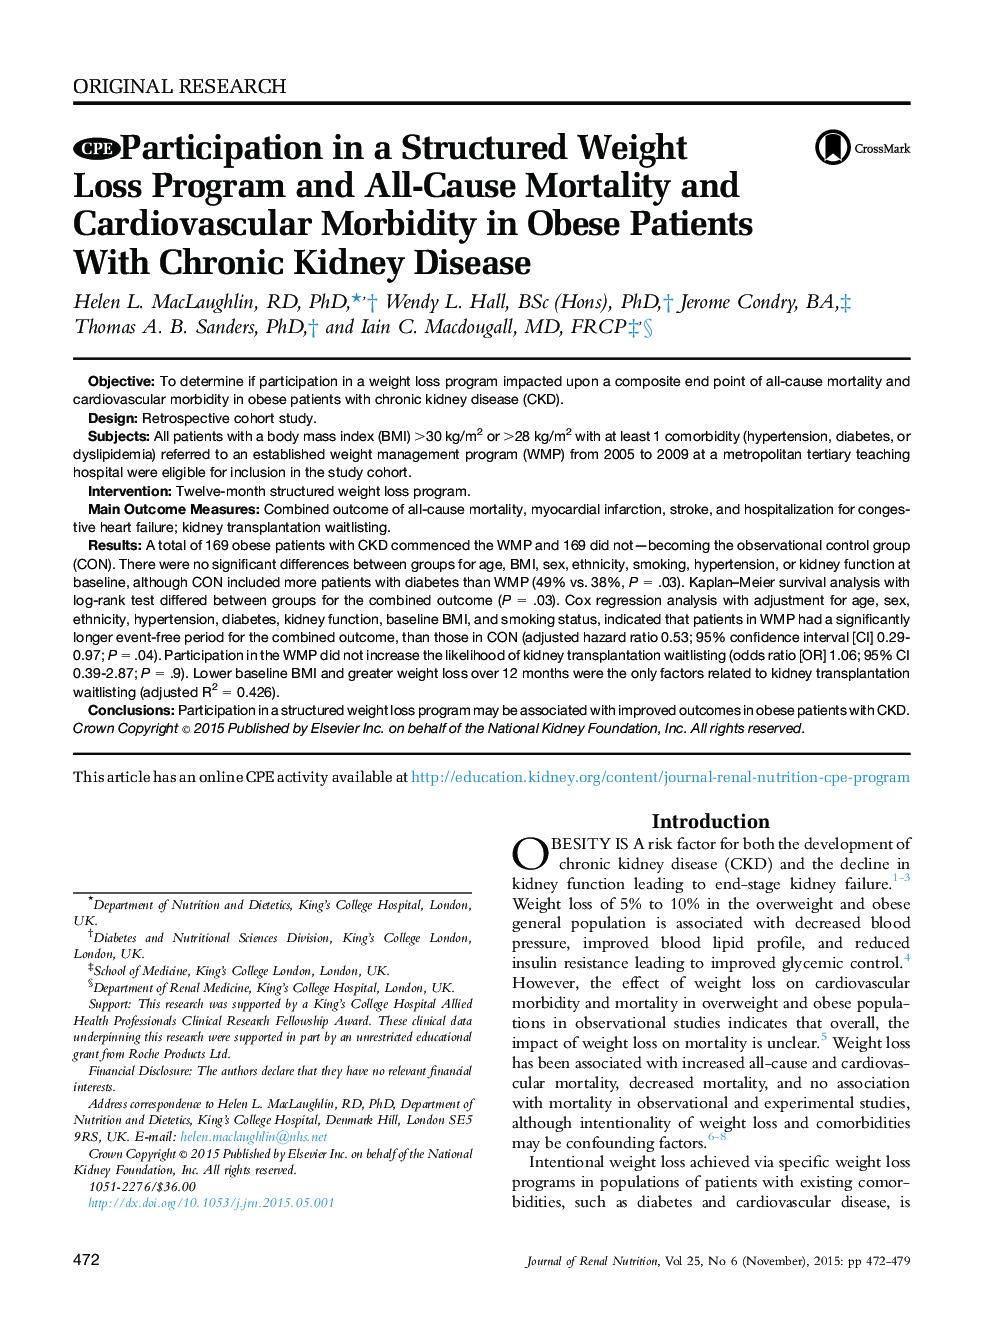 Participation in a Structured Weight Loss Program and All-Cause Mortality and Cardiovascular Morbidity in Obese Patients With Chronic Kidney Disease